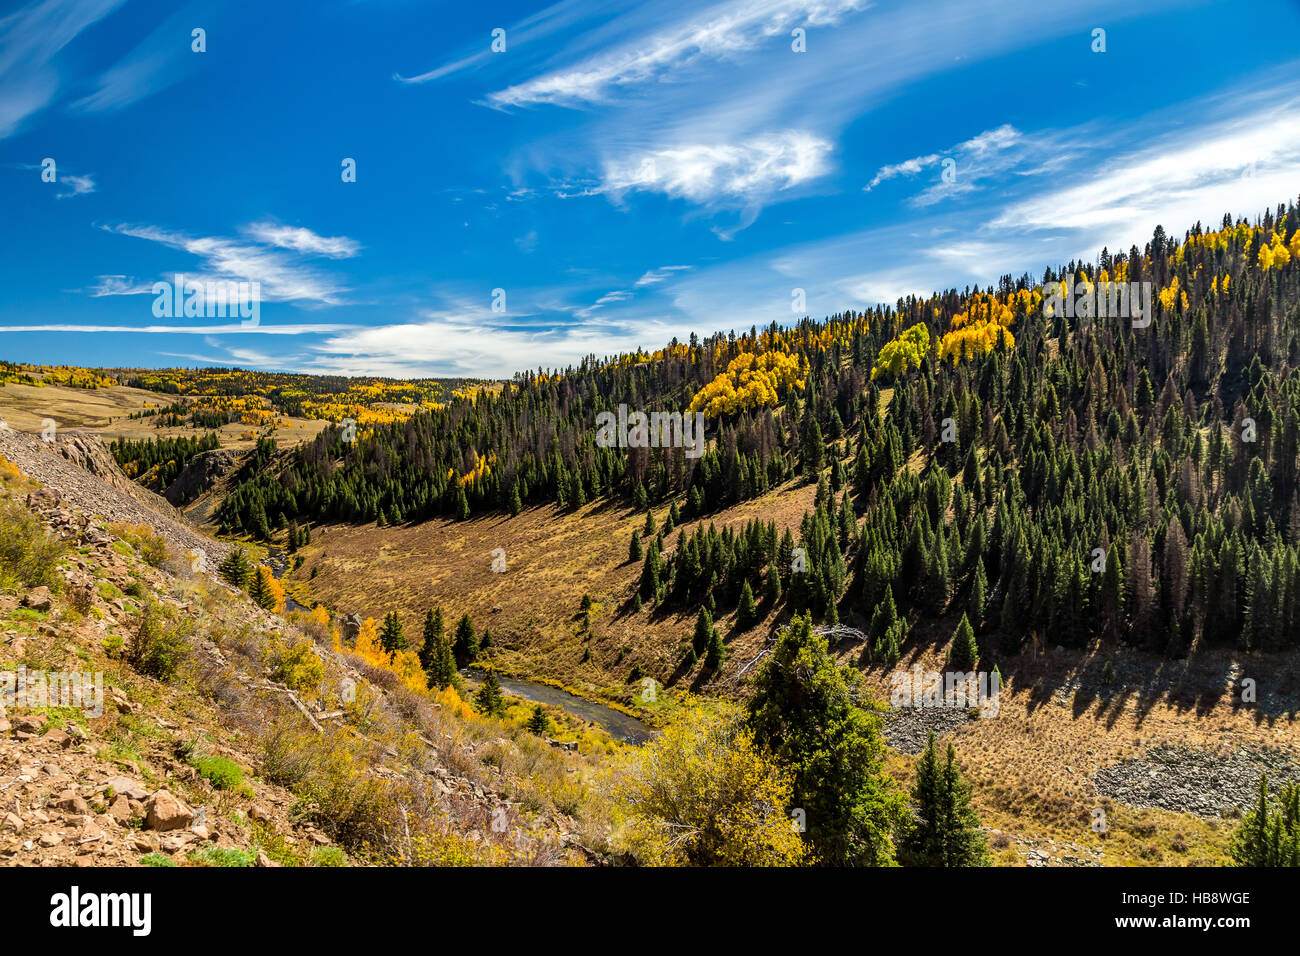 Mountain scenery with streams, valleys, and colorful trees along a train route from Chama, New Mexico to Antonito, Colorado Stock Photo